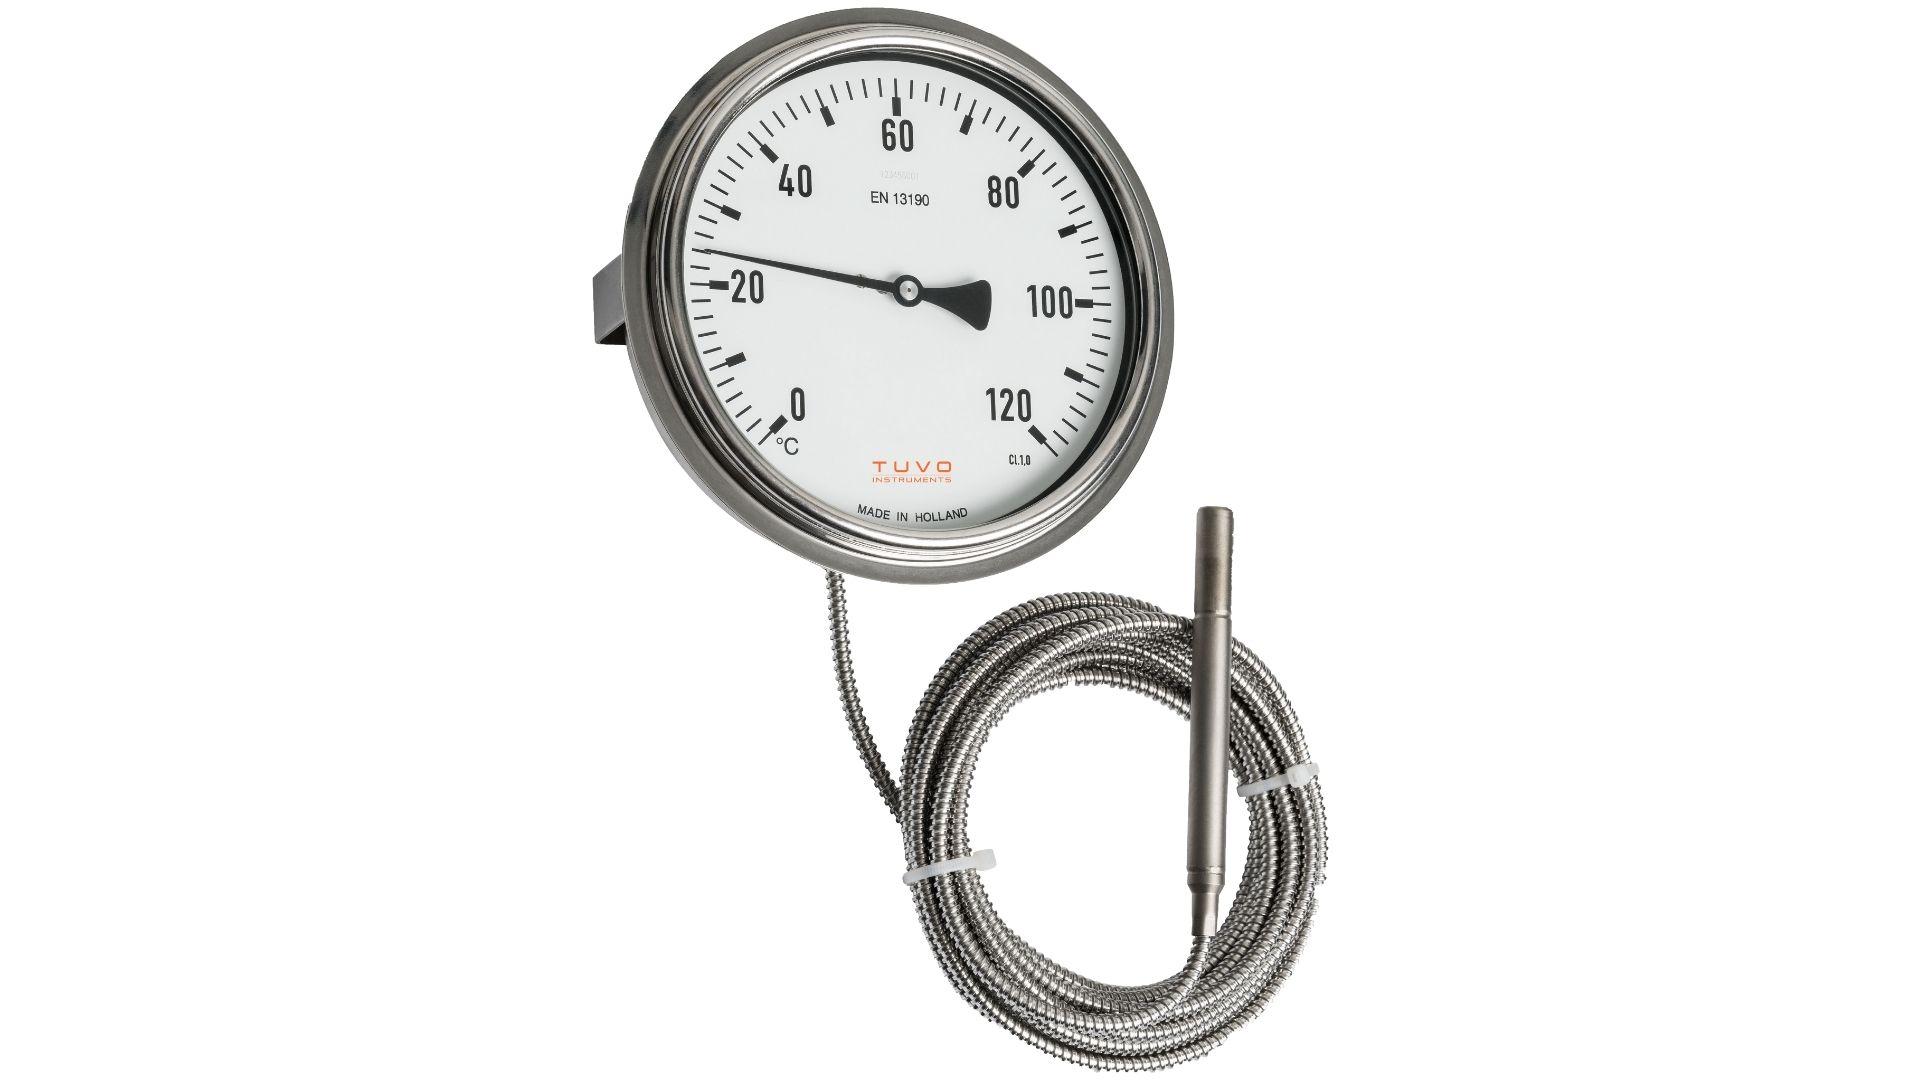 Remote reading thermometers - TUVO Instruments